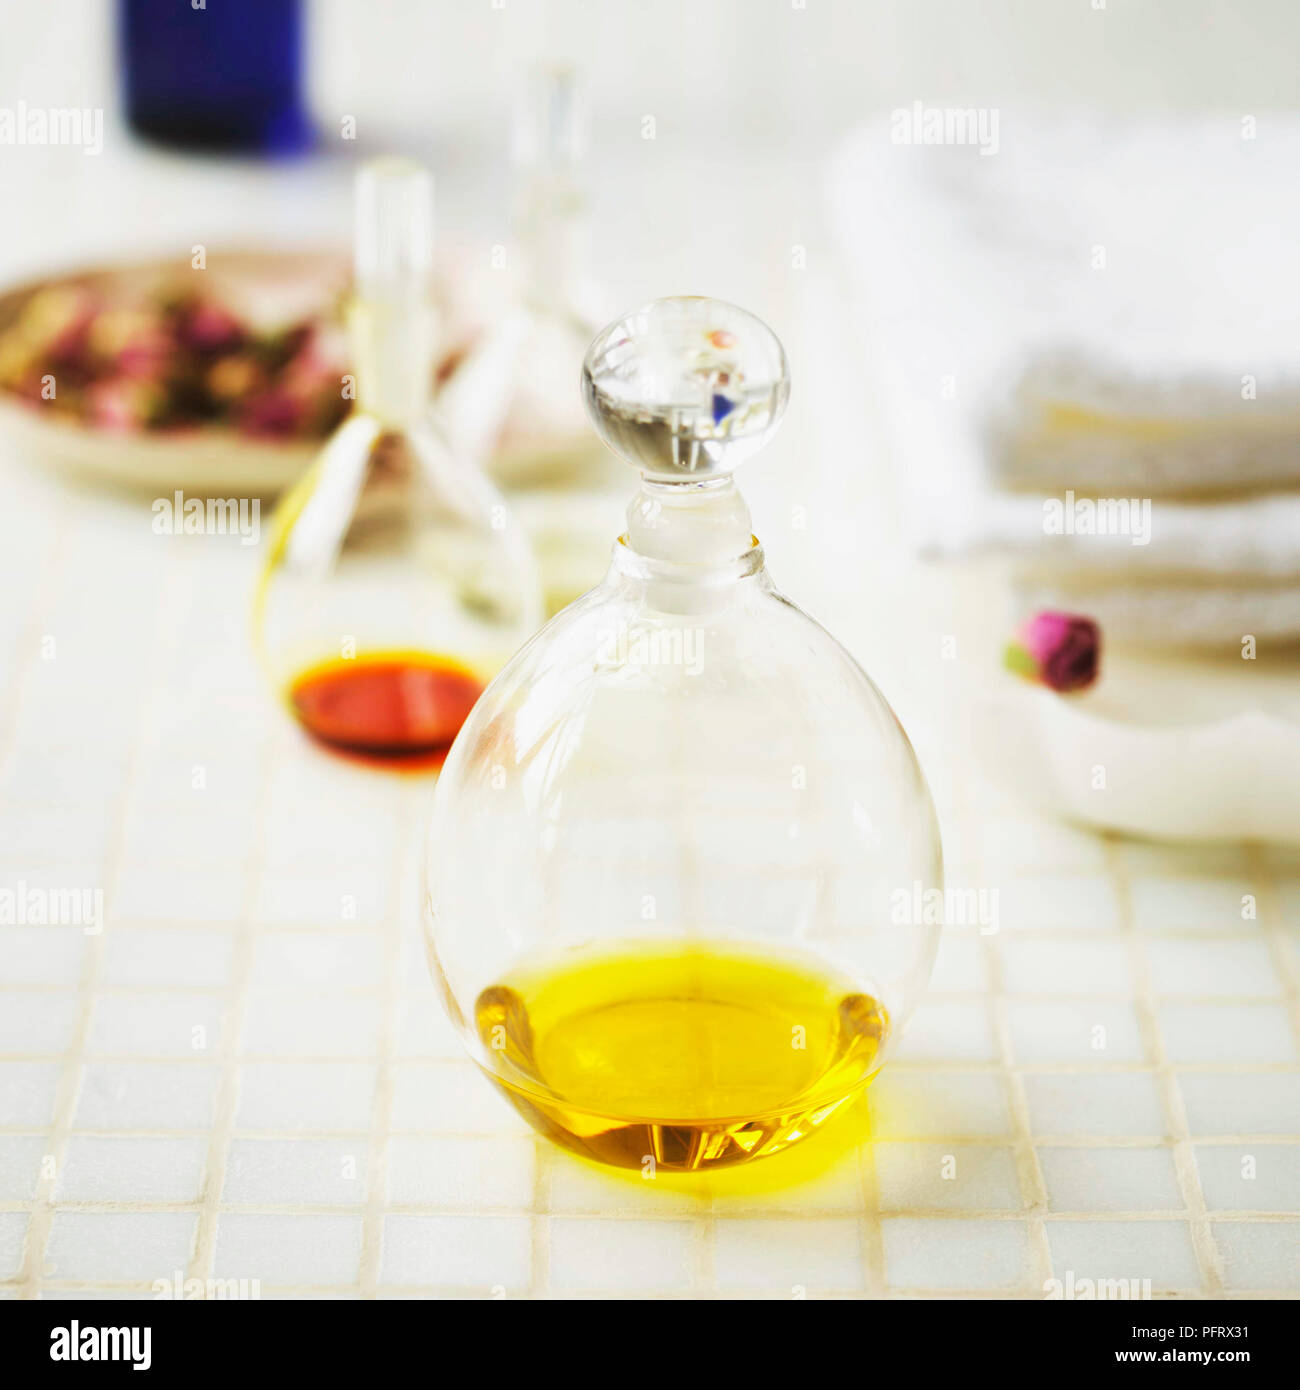 Bottle filled with aromatherapy blend Stock Photo